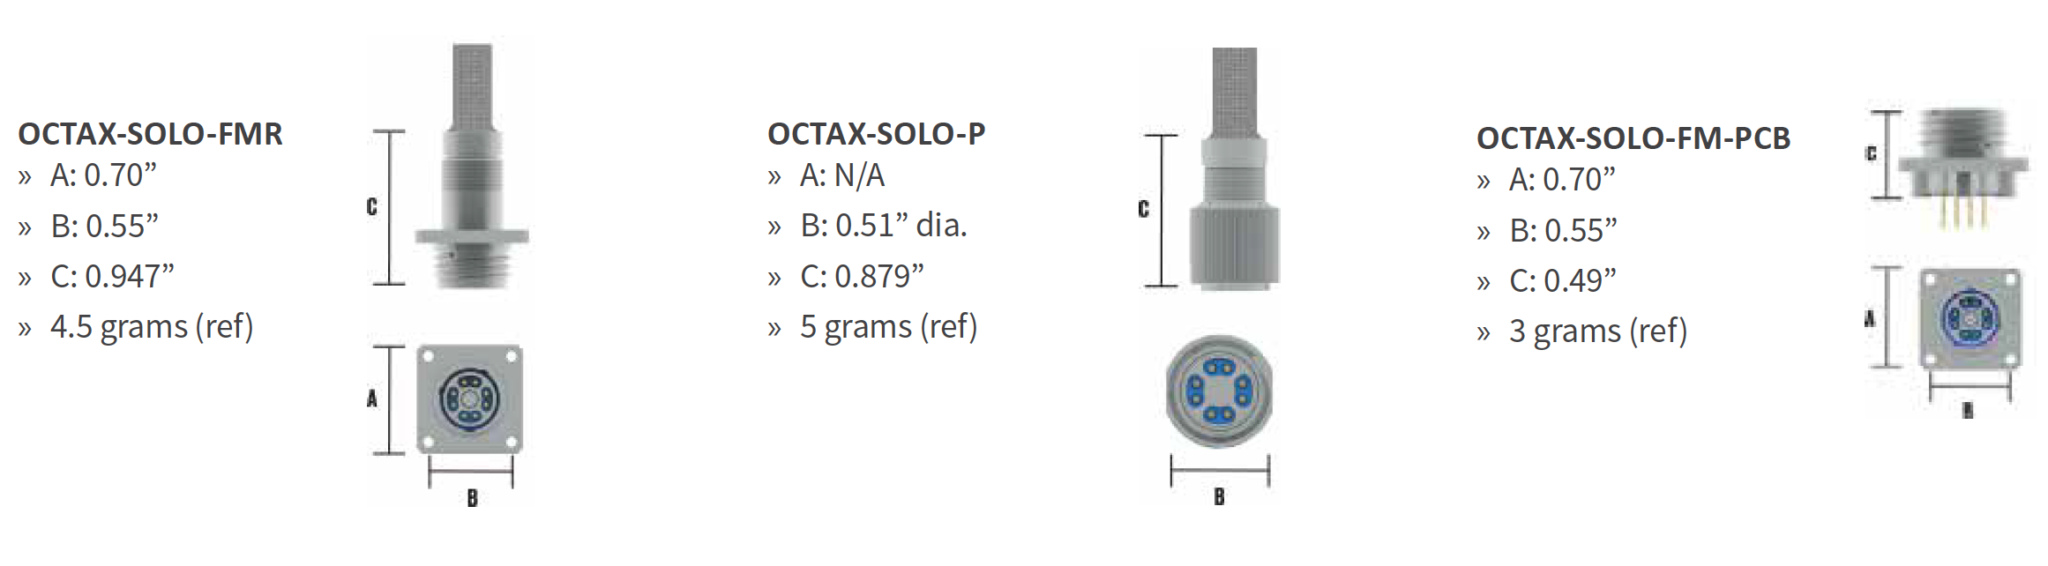 Octax-Solo-Part-Numbering